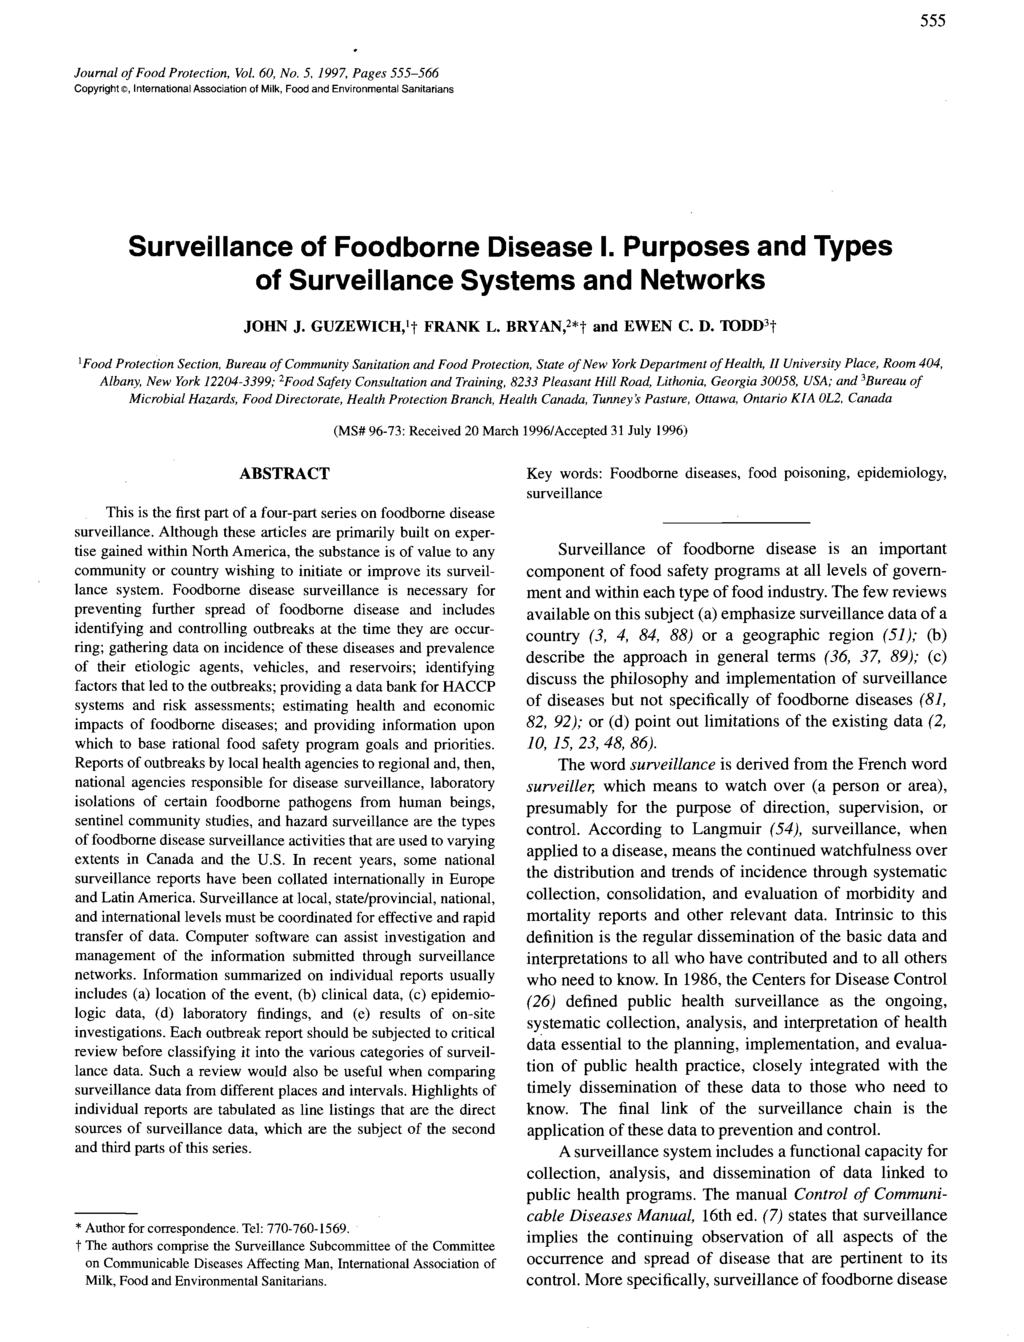 555 Journal of Food Protection, Vol. 60, No.5, 1997, Pages 555-566 Copyright, International Association 0' Milk, Food and Environmental Sanitarians Surveillance of Foodborne Disease I.